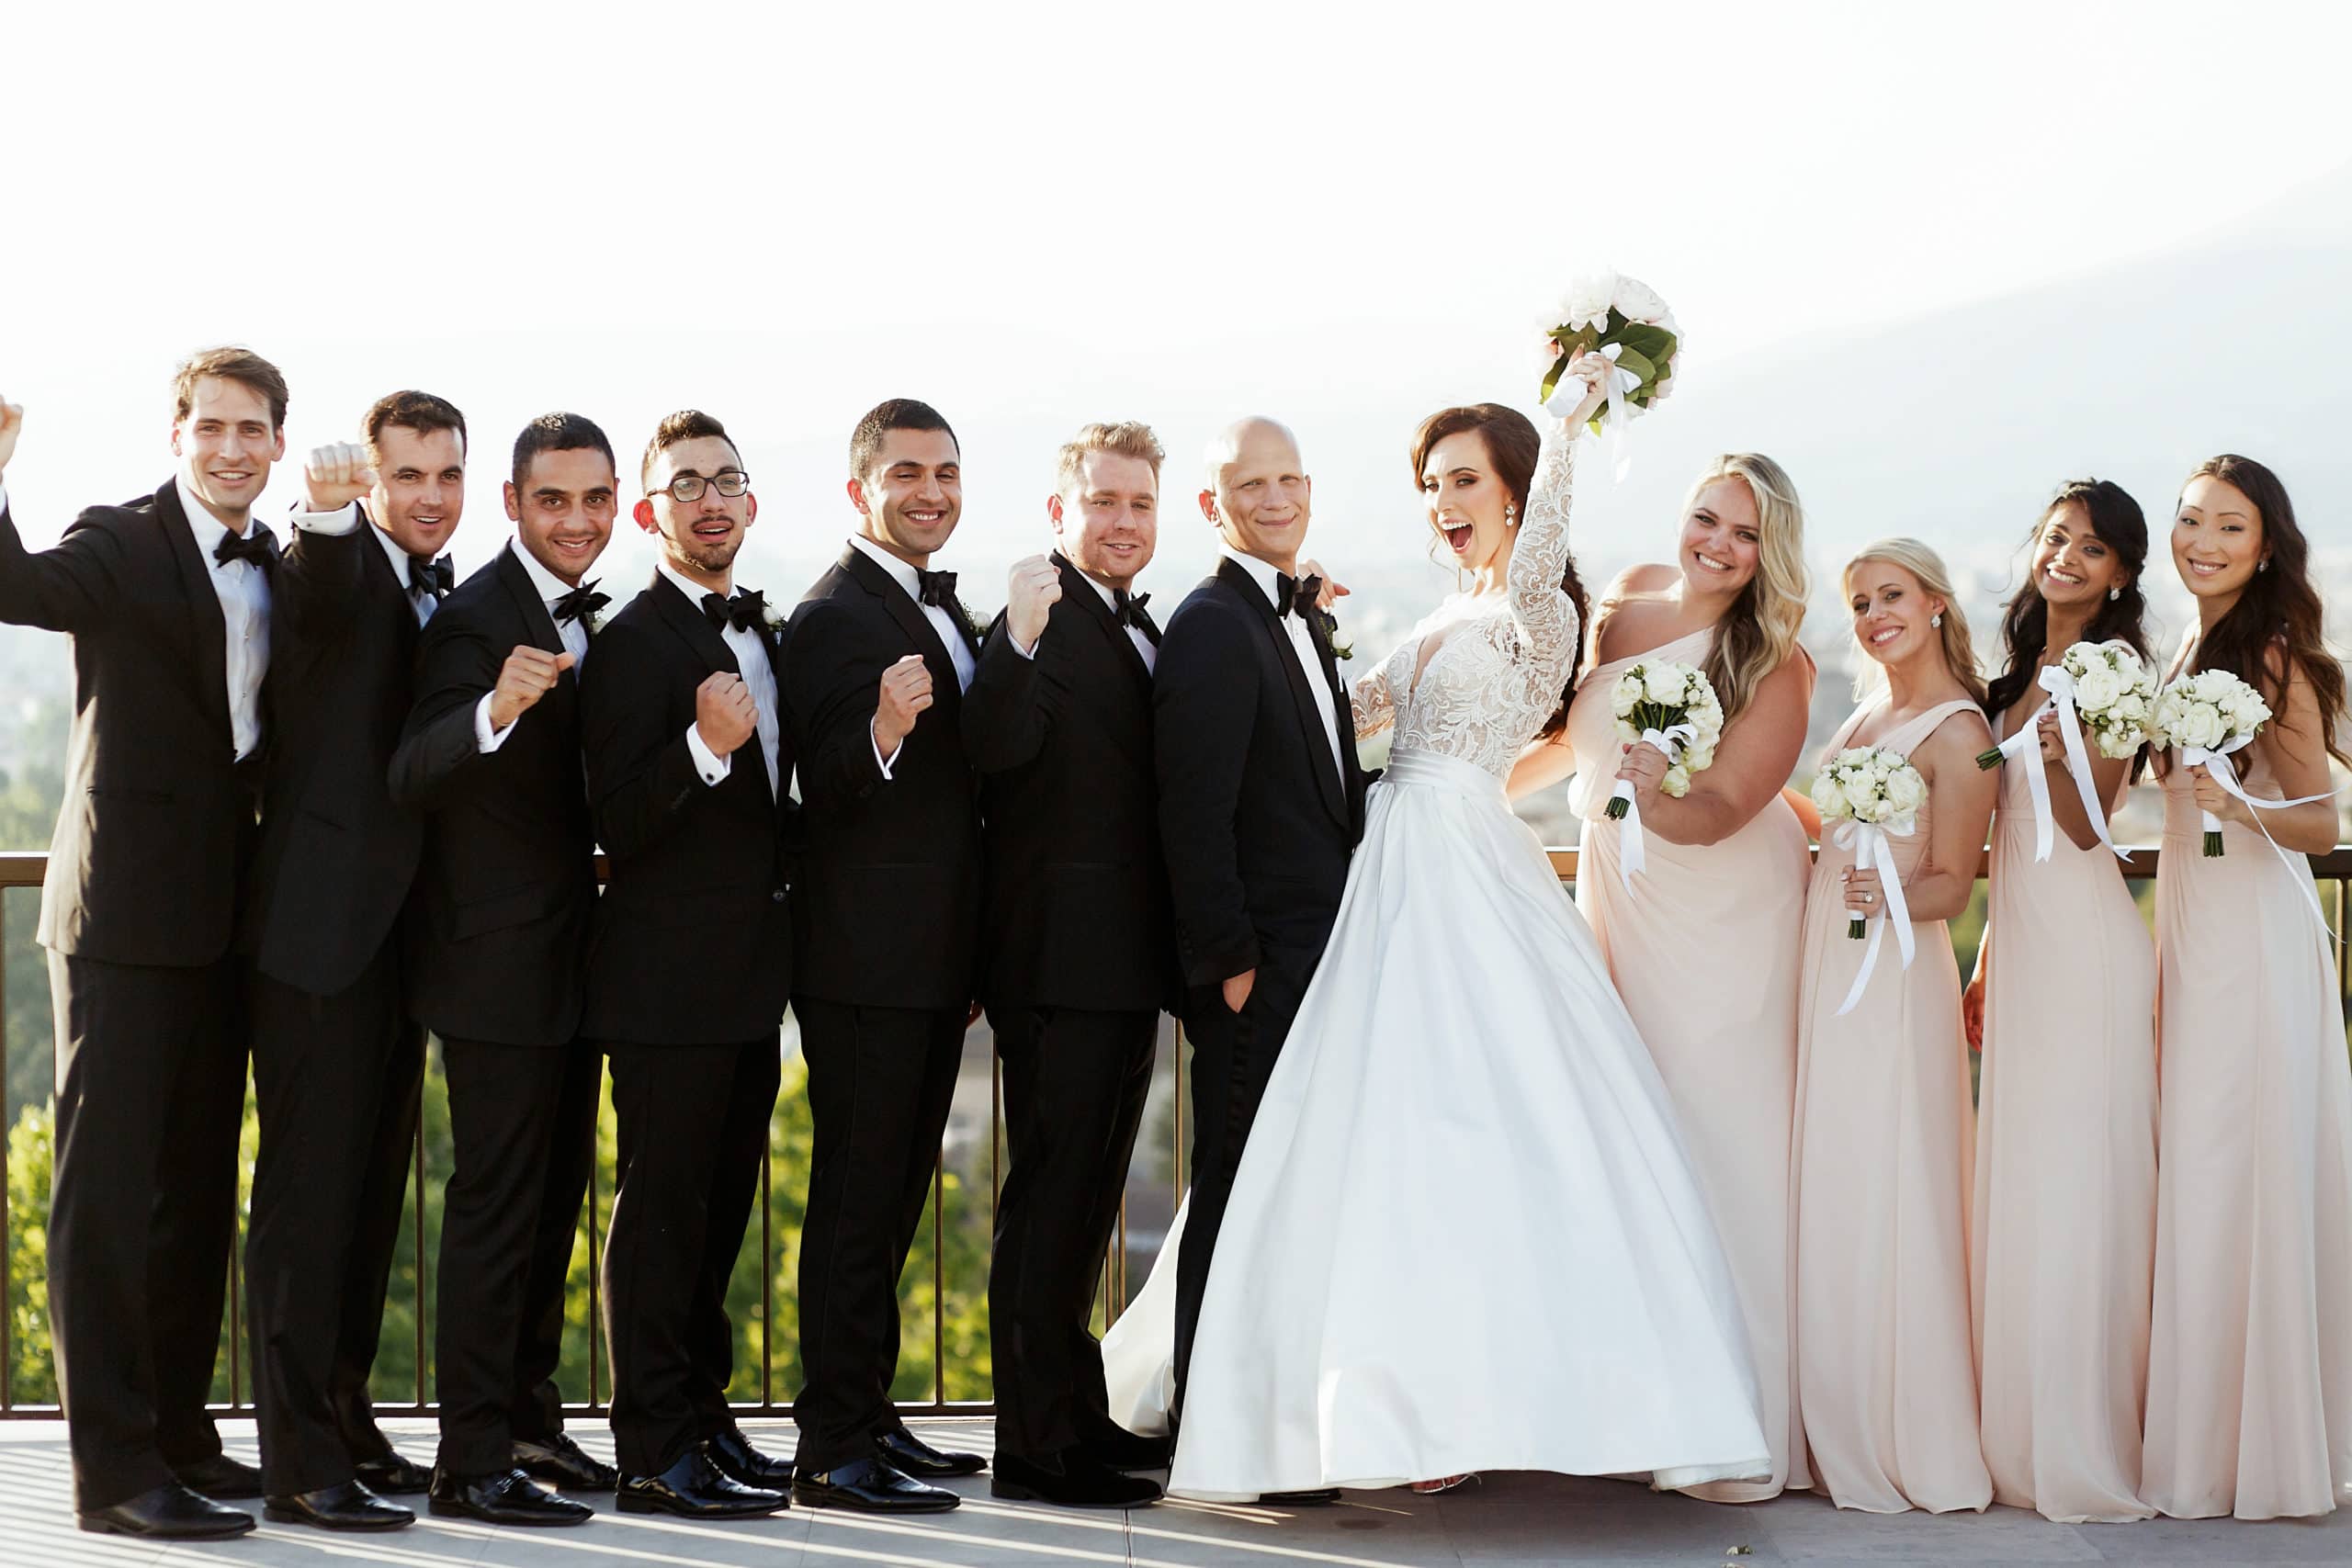 Bridal party in black tuxedos and long blush dresses standing with happy bride and groom. 